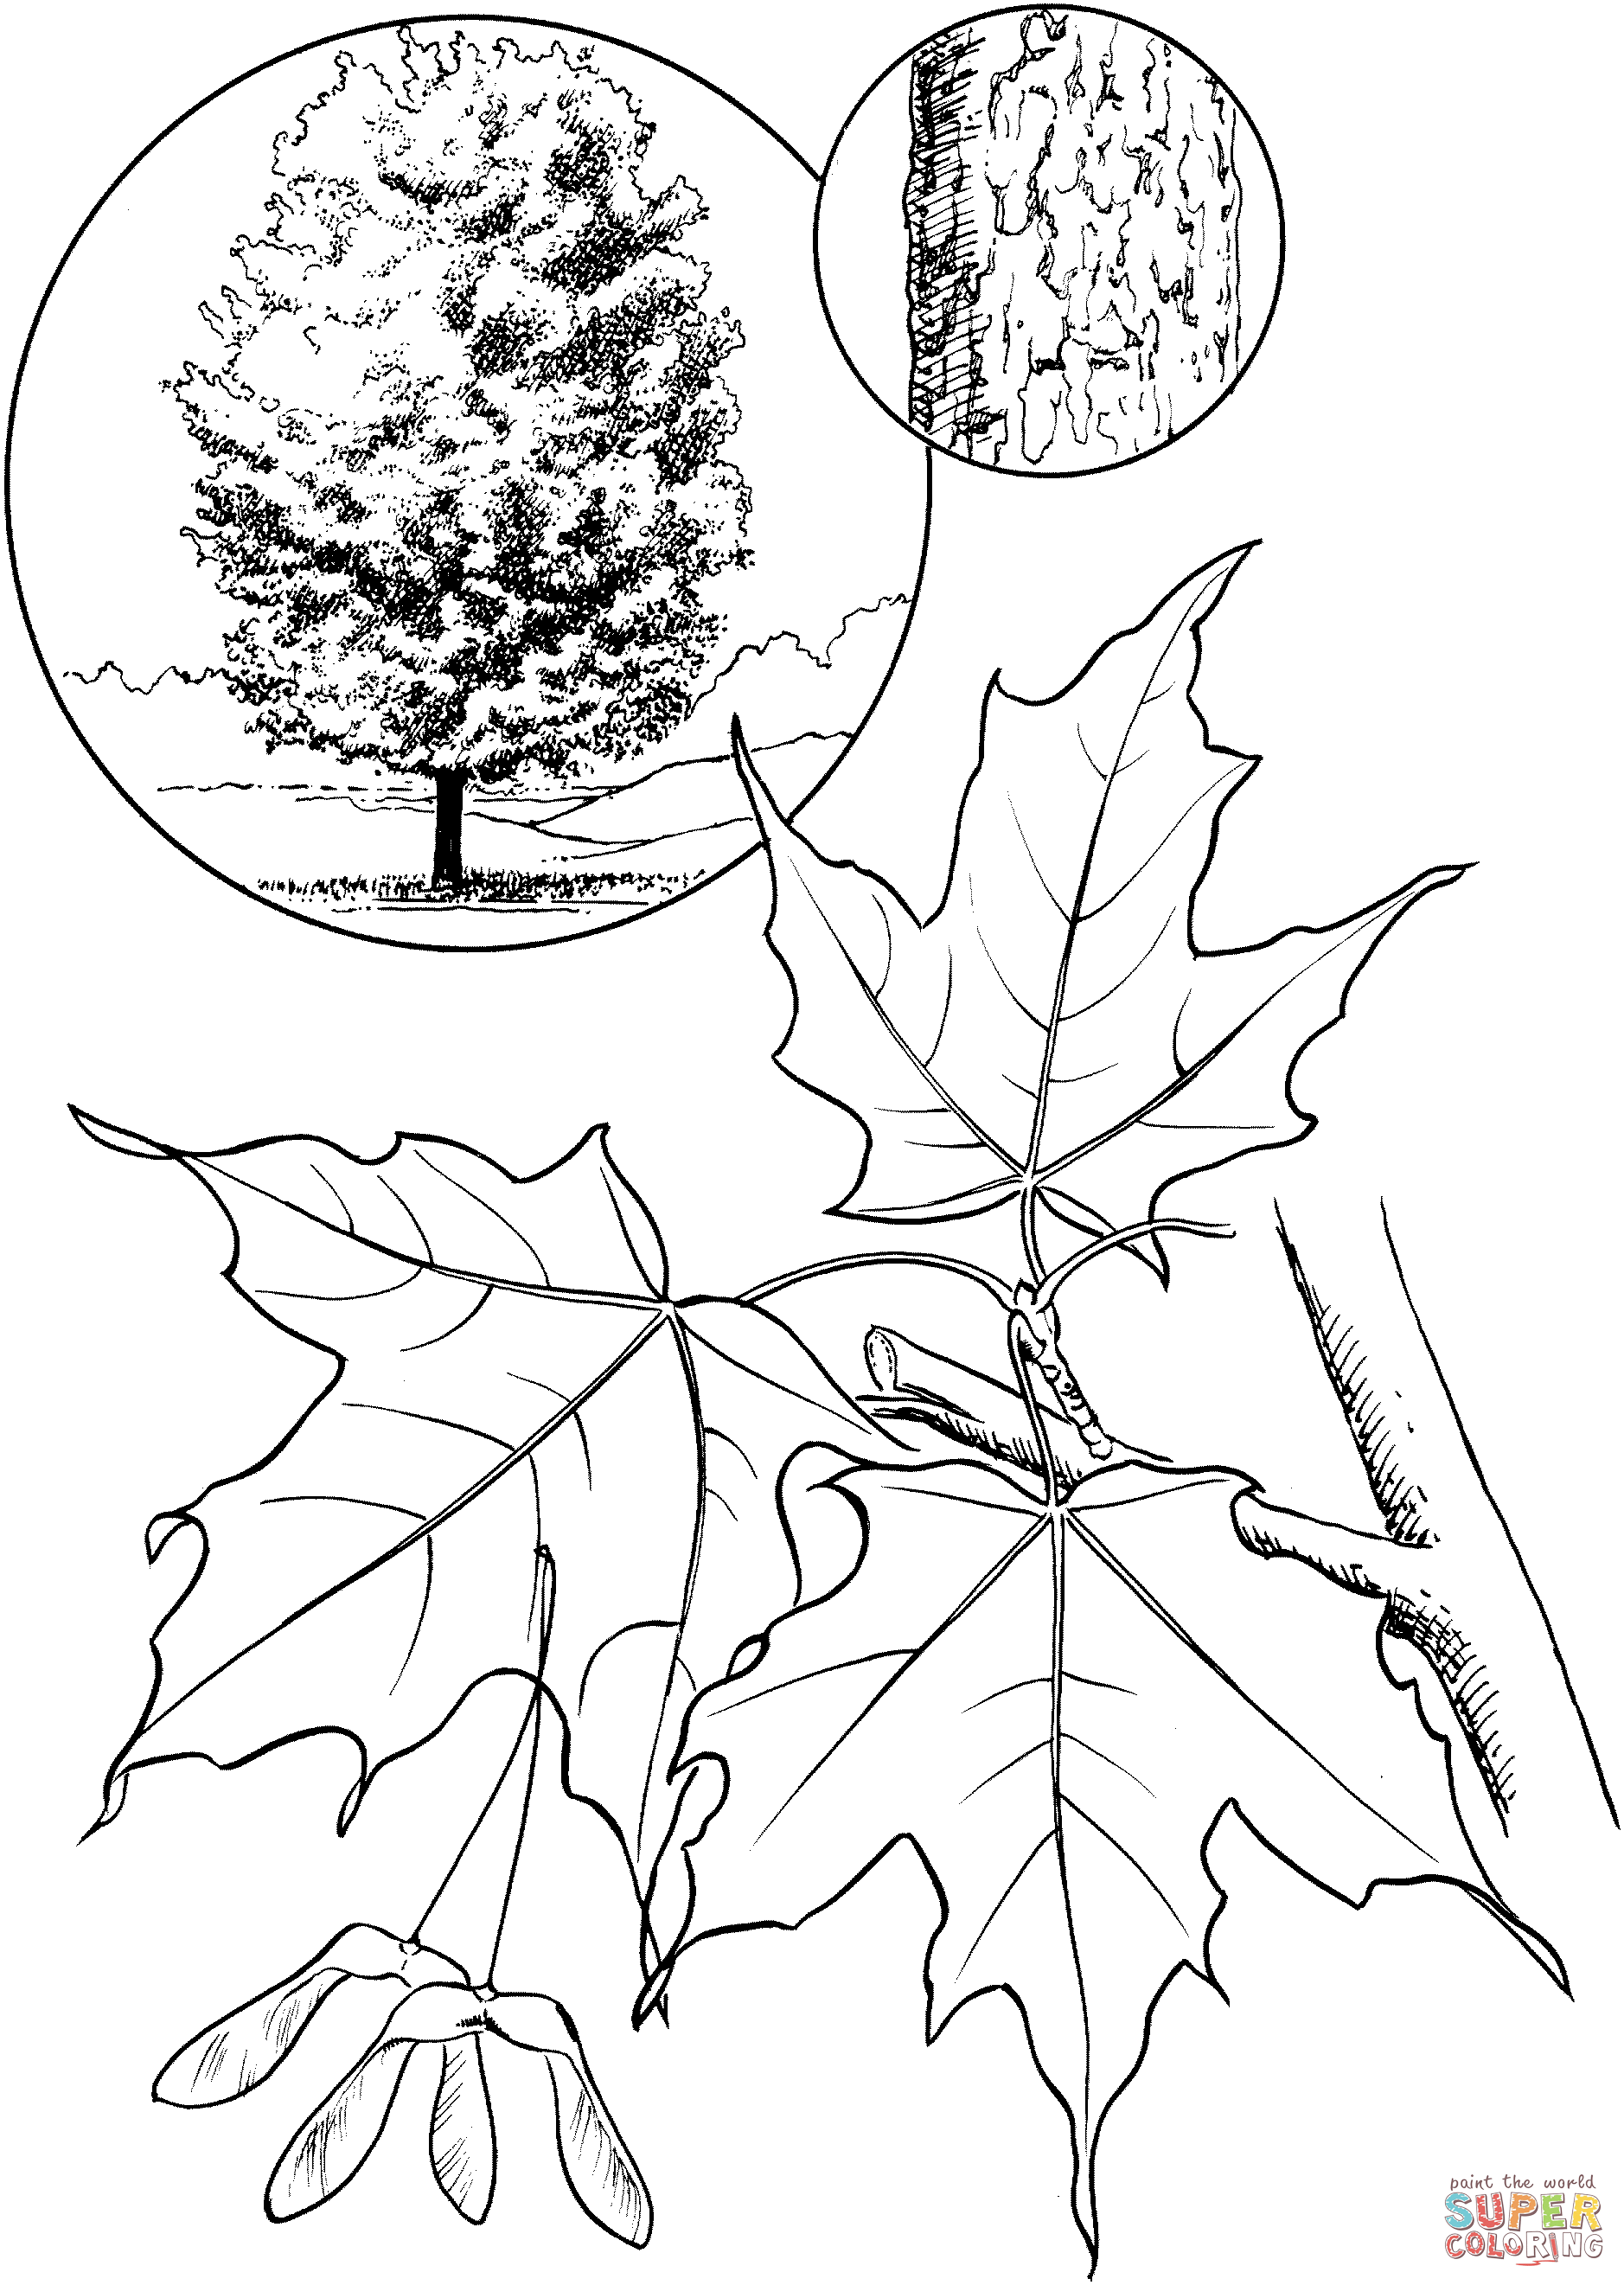 Sugar maple tree coloring page from maples category select from printable crafts of cartoons naturâ tree coloring page leaf coloring page coloring pages